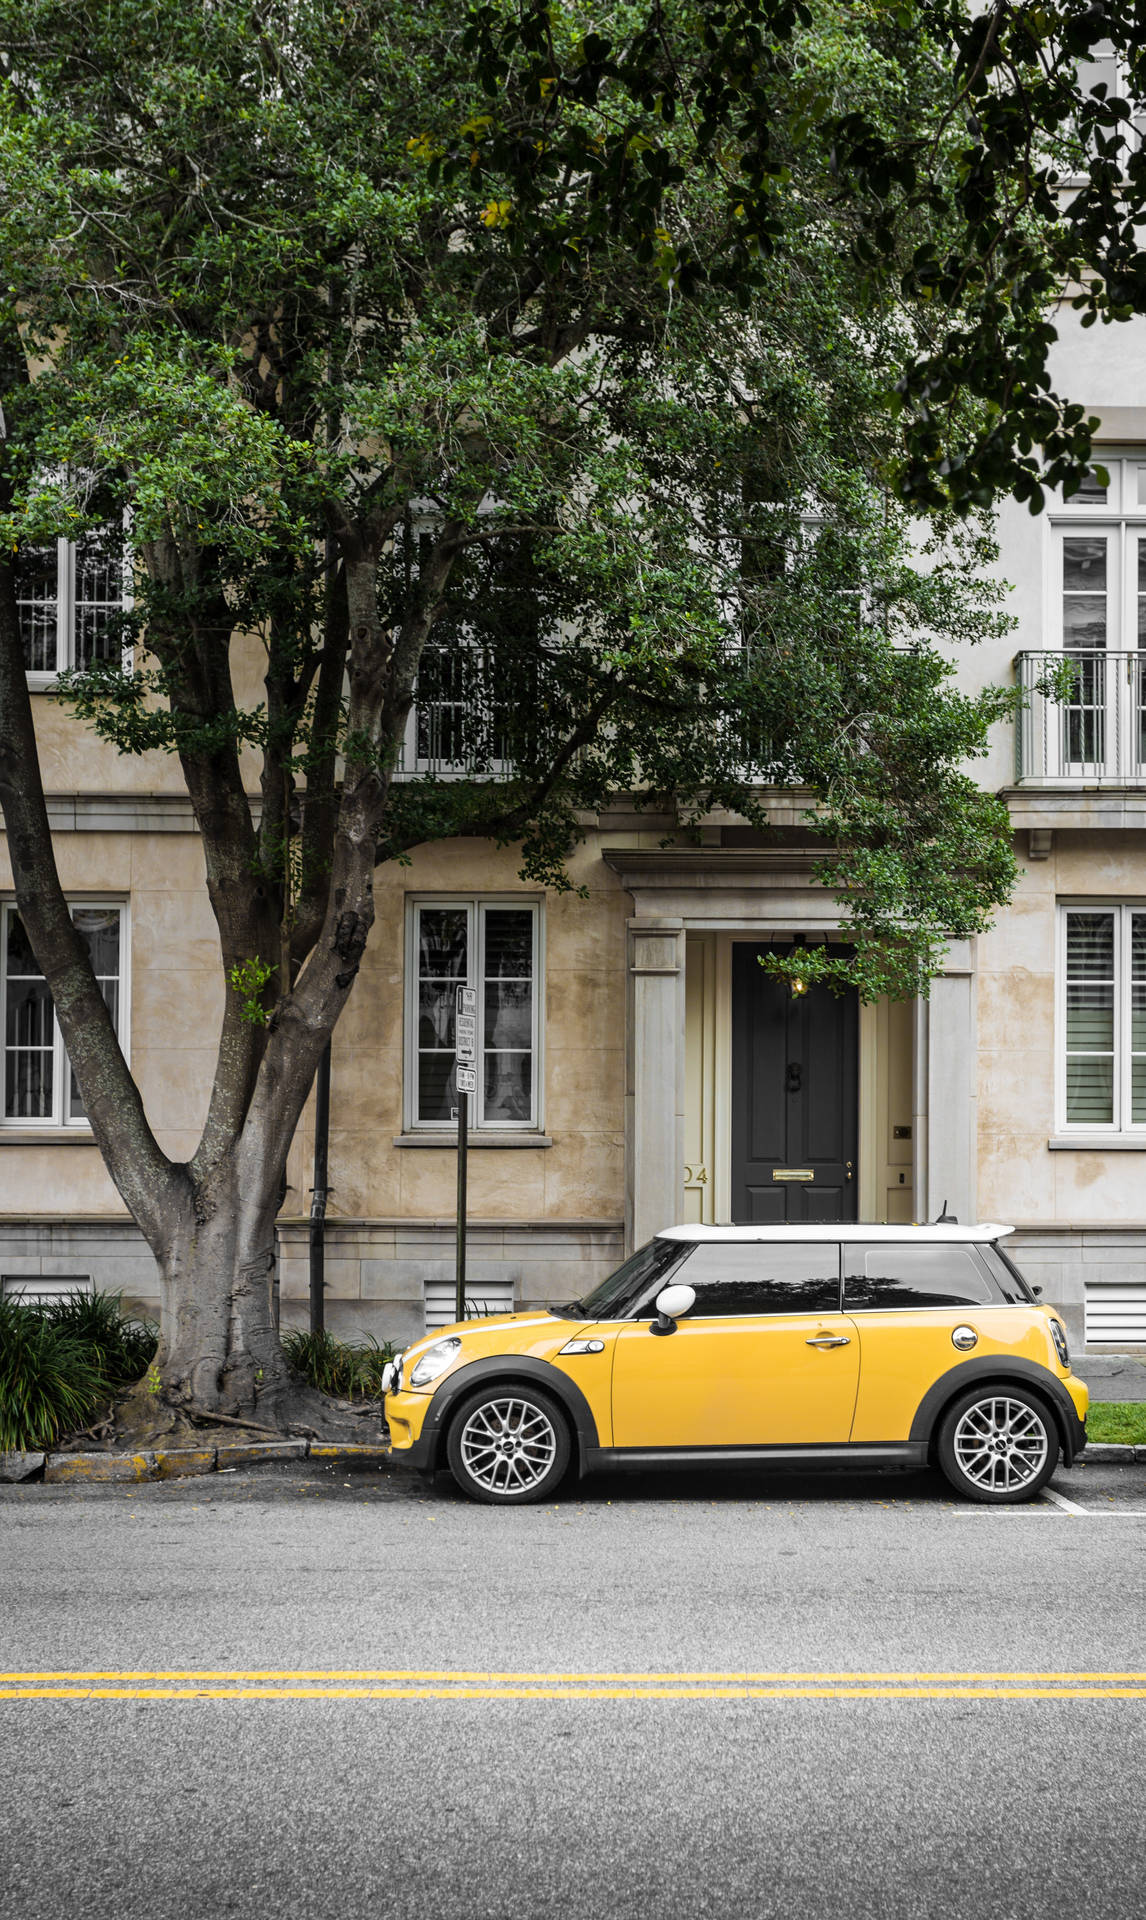 Mini Cooper Parking At The Street Background